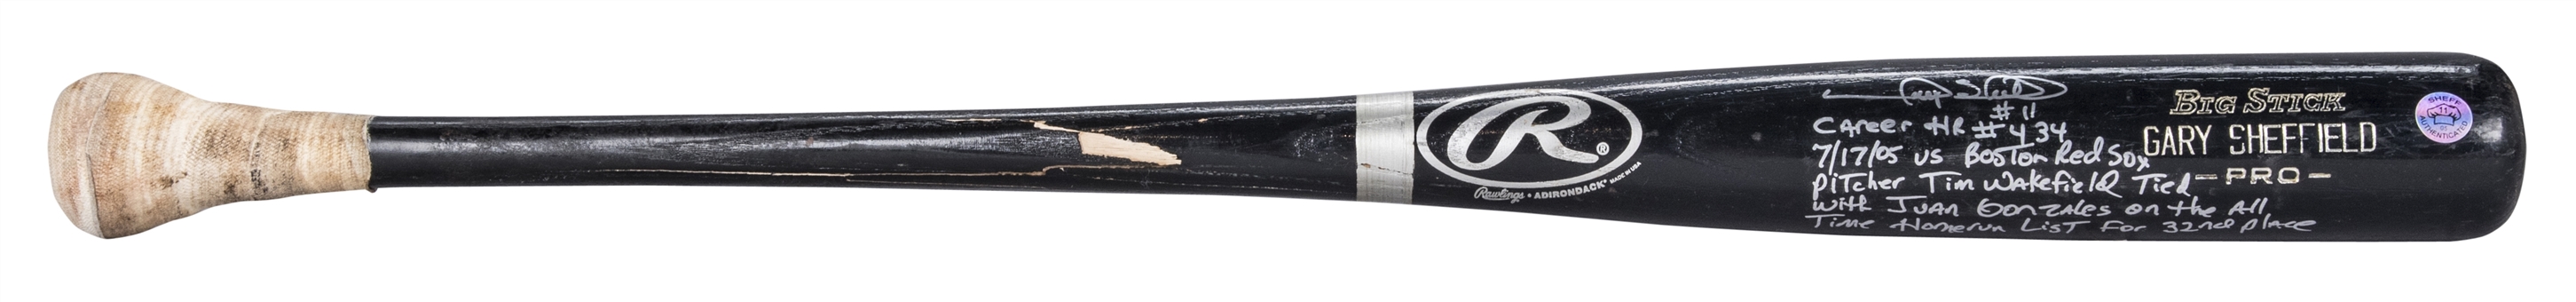 2005 Gary Sheffield Game Used, Signed & Inscribed Rawlings 170B Bat Used For Career HR #434 On 7/17/05 (PSA/DNA)